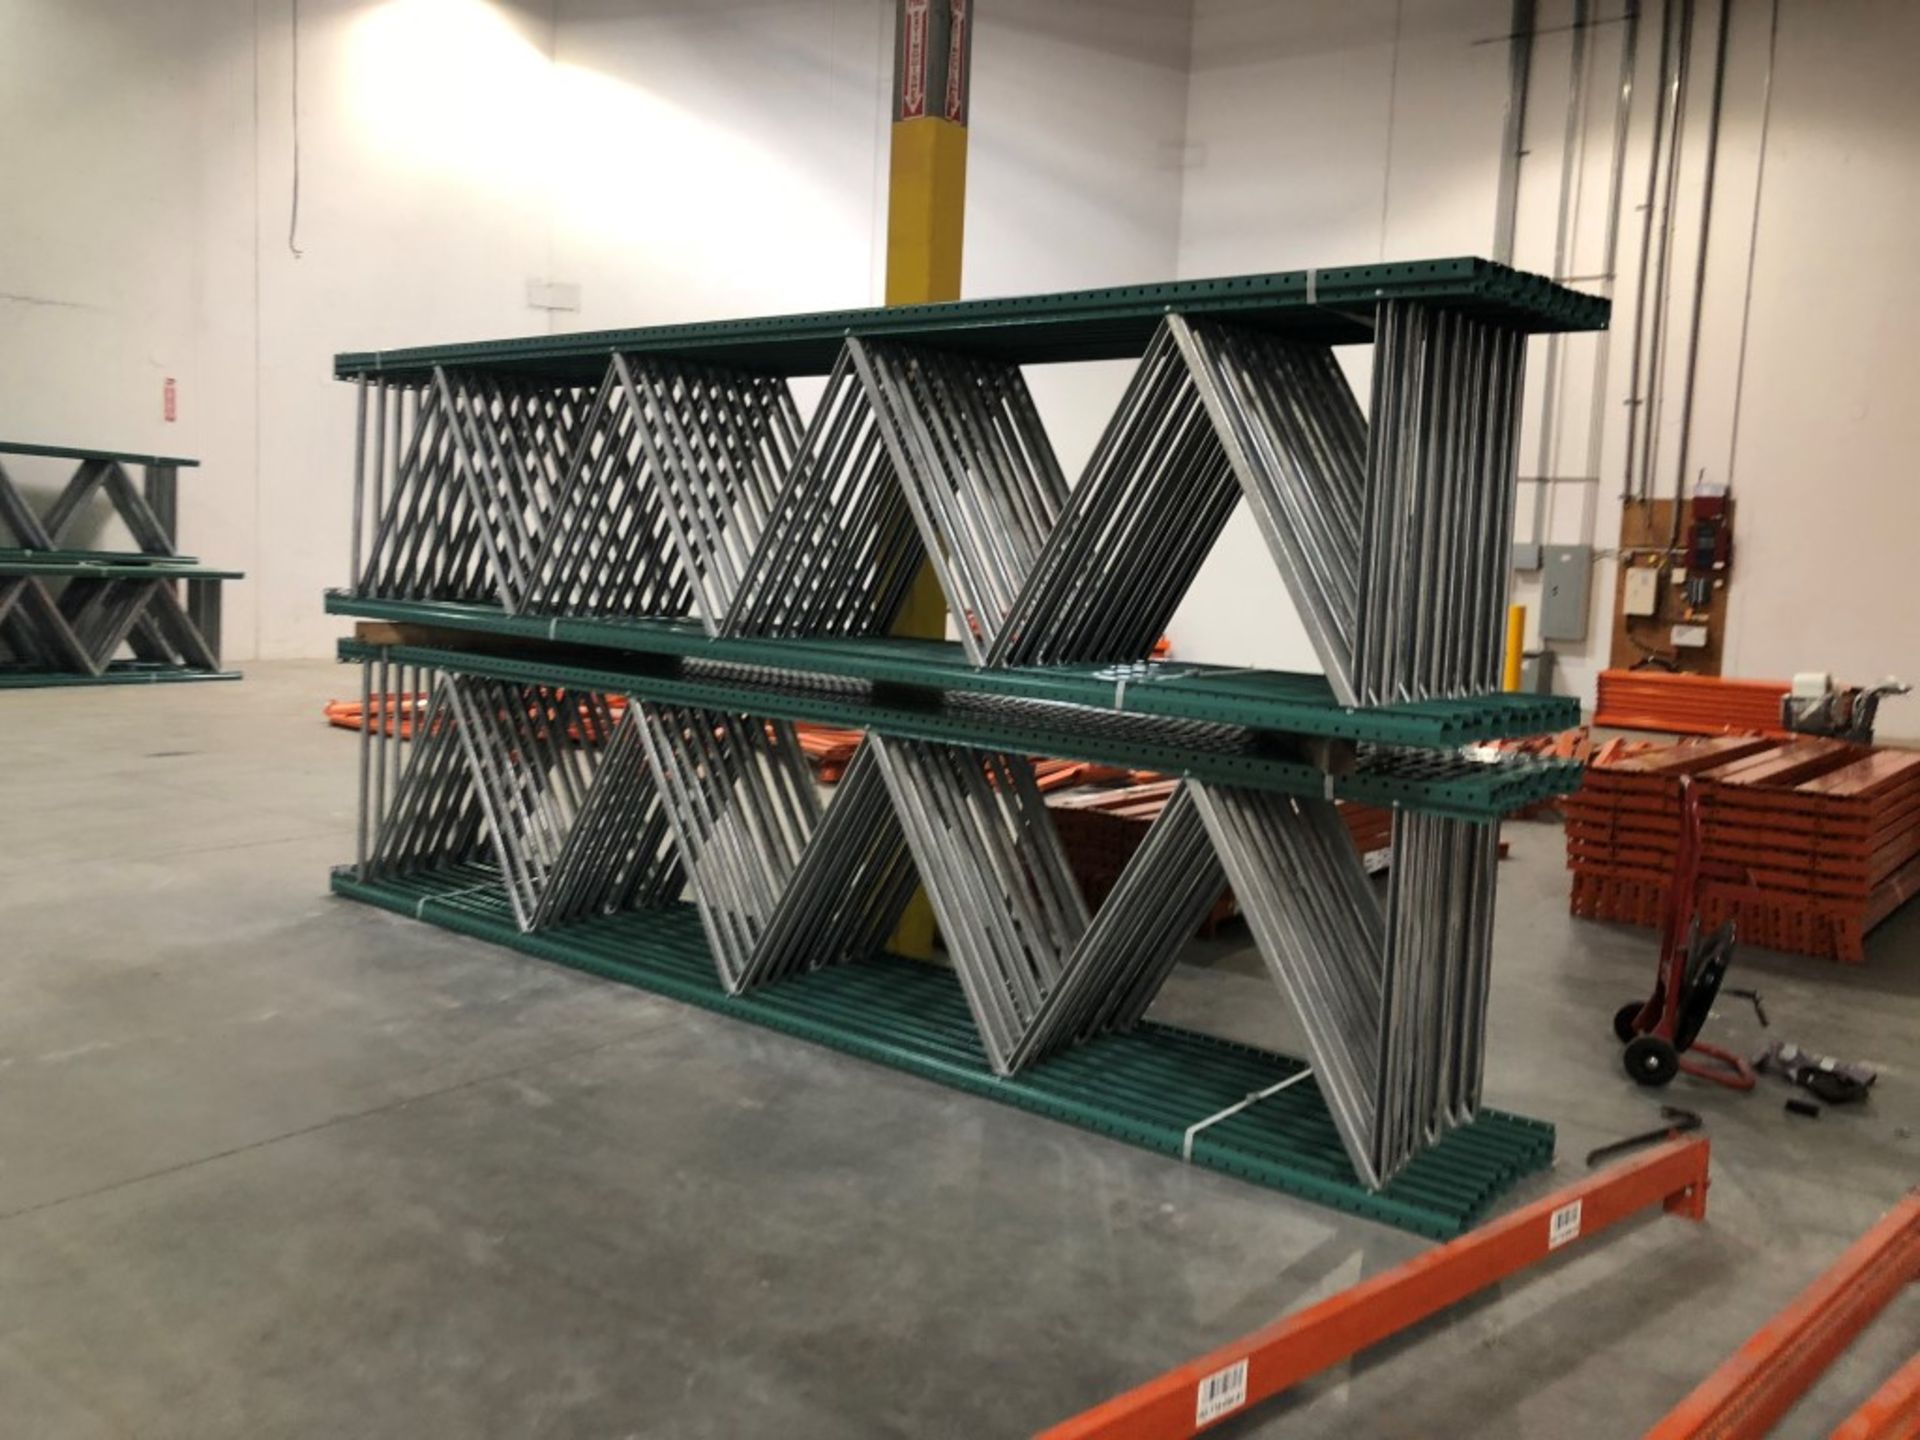 14 BAYS OF TEARDROP STYLE PALLET RACK, SIZE: 16'H x 42"D X 96"W - Image 2 of 4